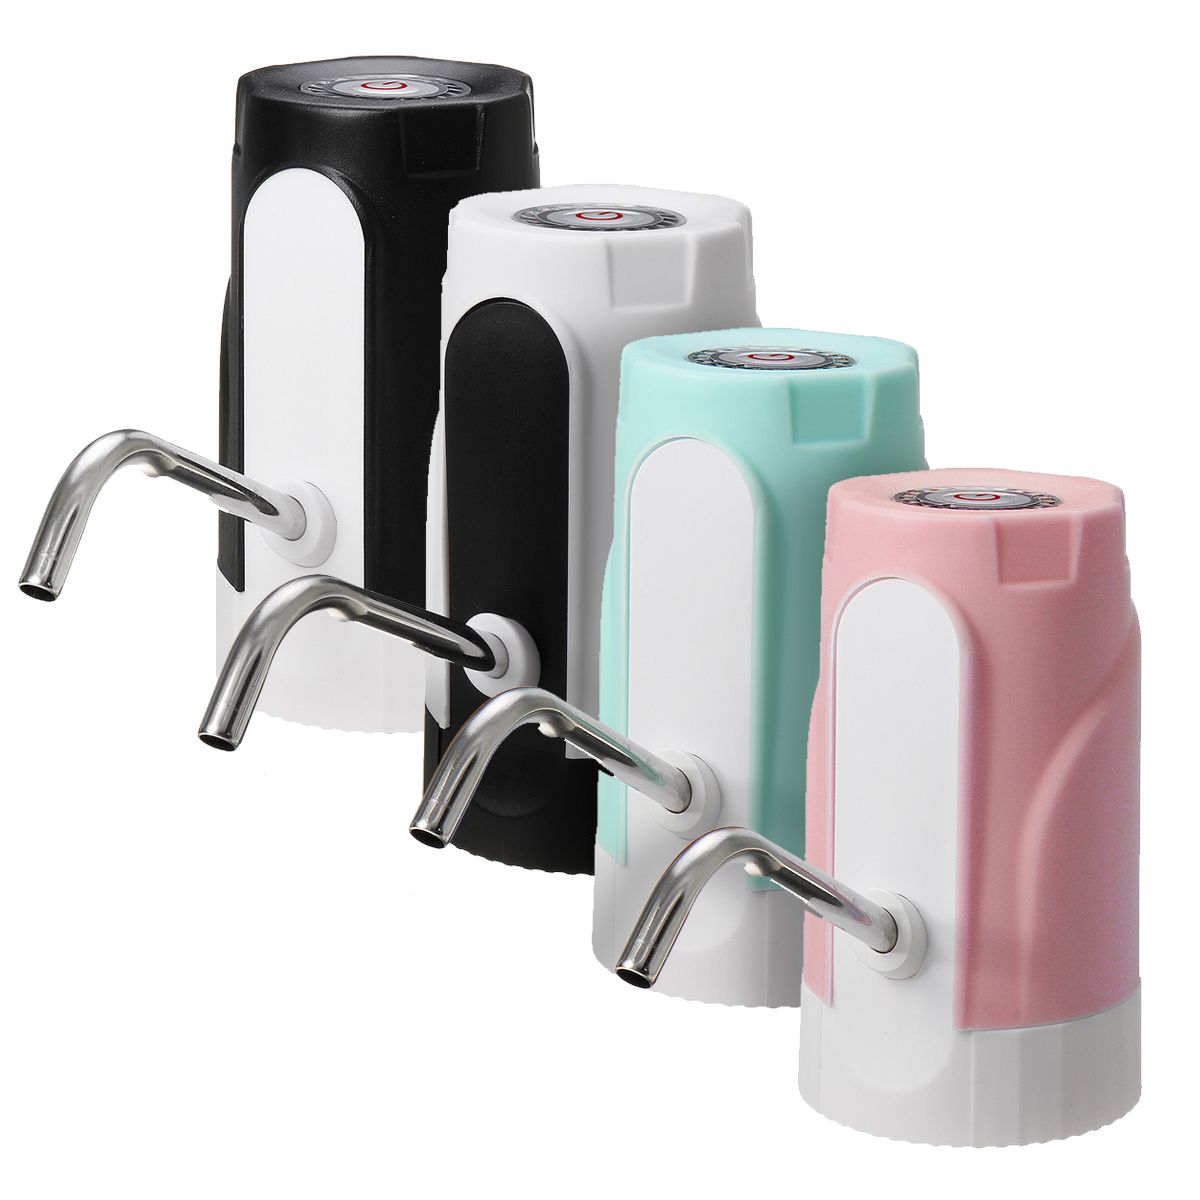 Electric-Drinking-Water-Pump-Portable-Water-Dispenser-Water-Bottles-USB-Charging-Automatic-Waterer-1651163